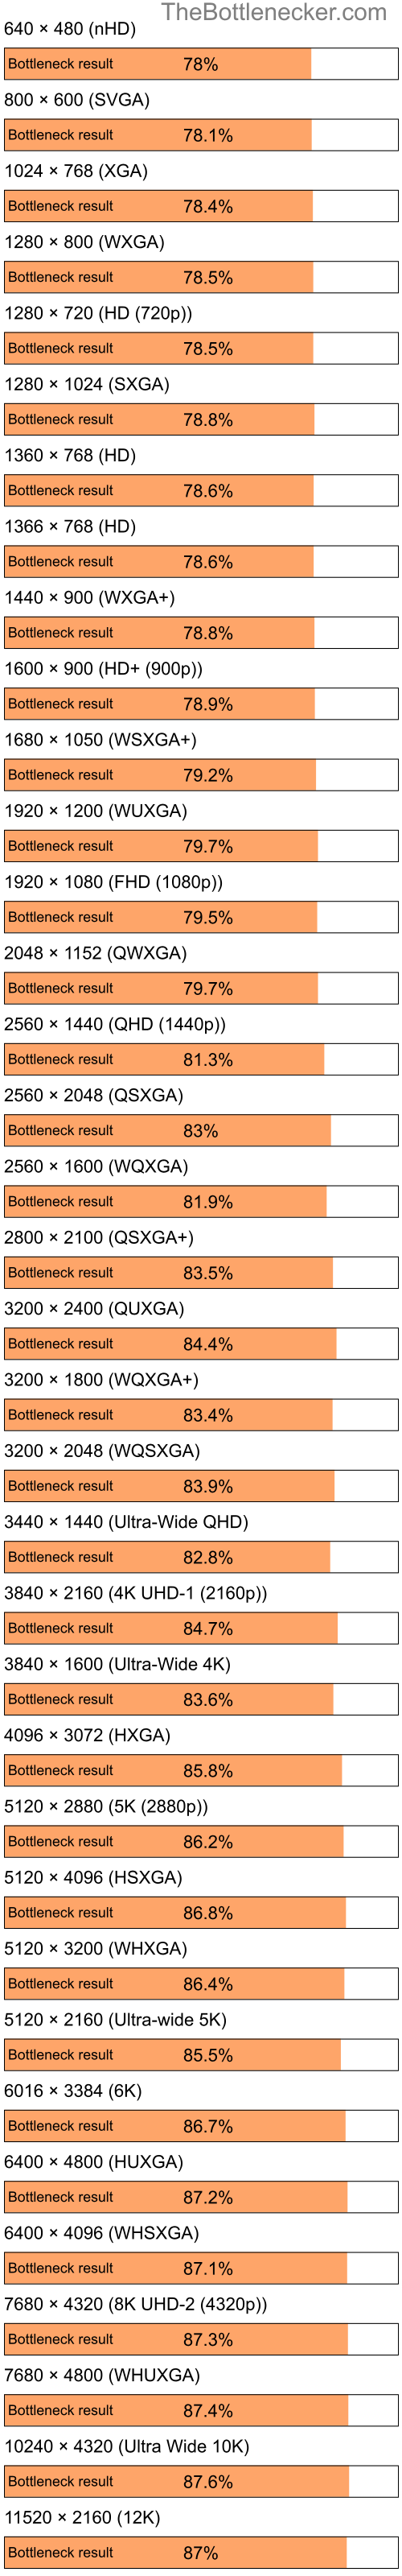 Bottleneck results by resolution for Intel Atom Z520 and AMD Radeon X1550 64-bit in Graphic Card Intense Tasks